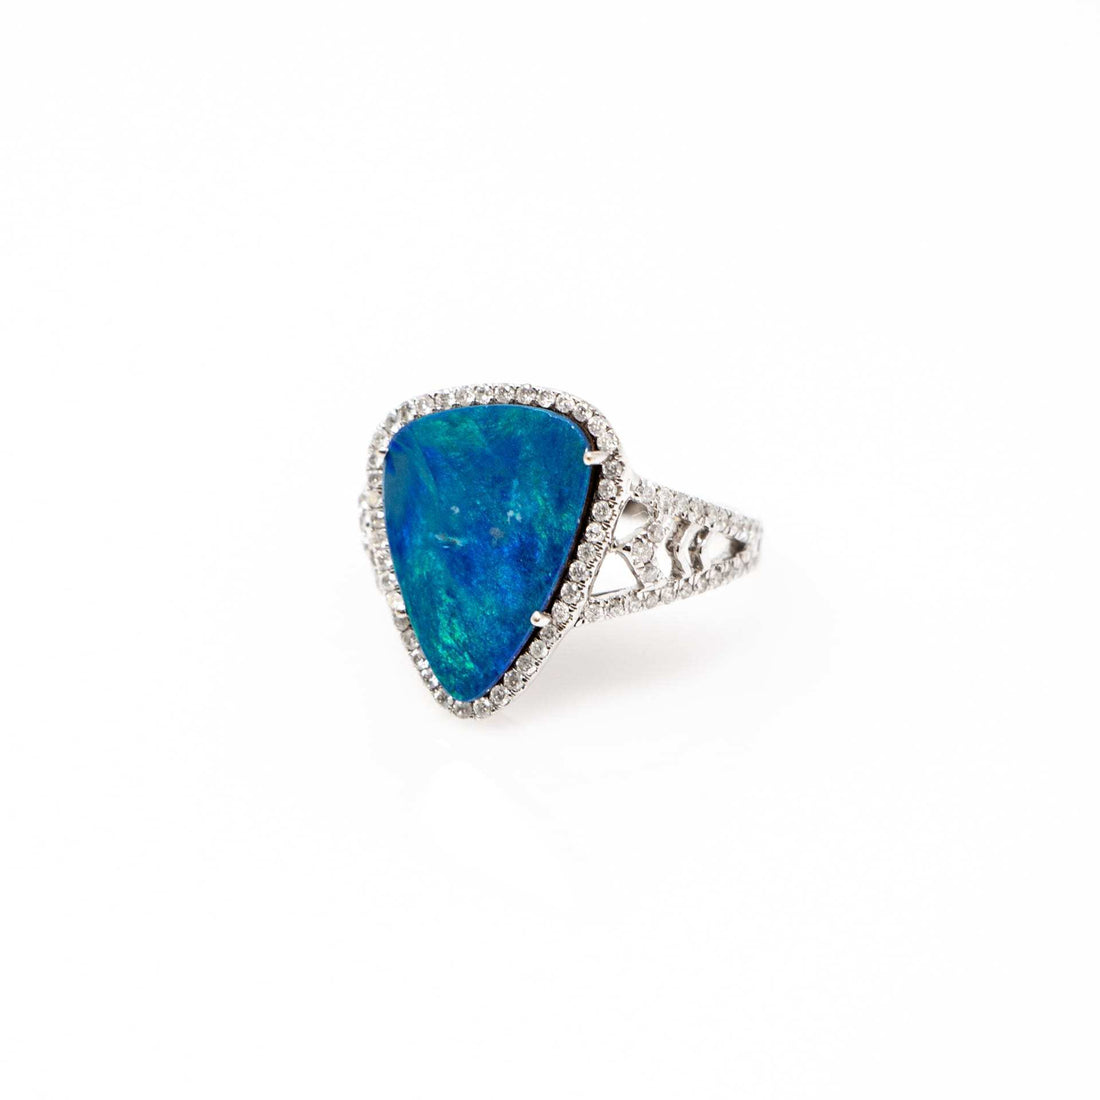 OCTOBER BIRTHSTONES: OPAL AND TOURMALINE